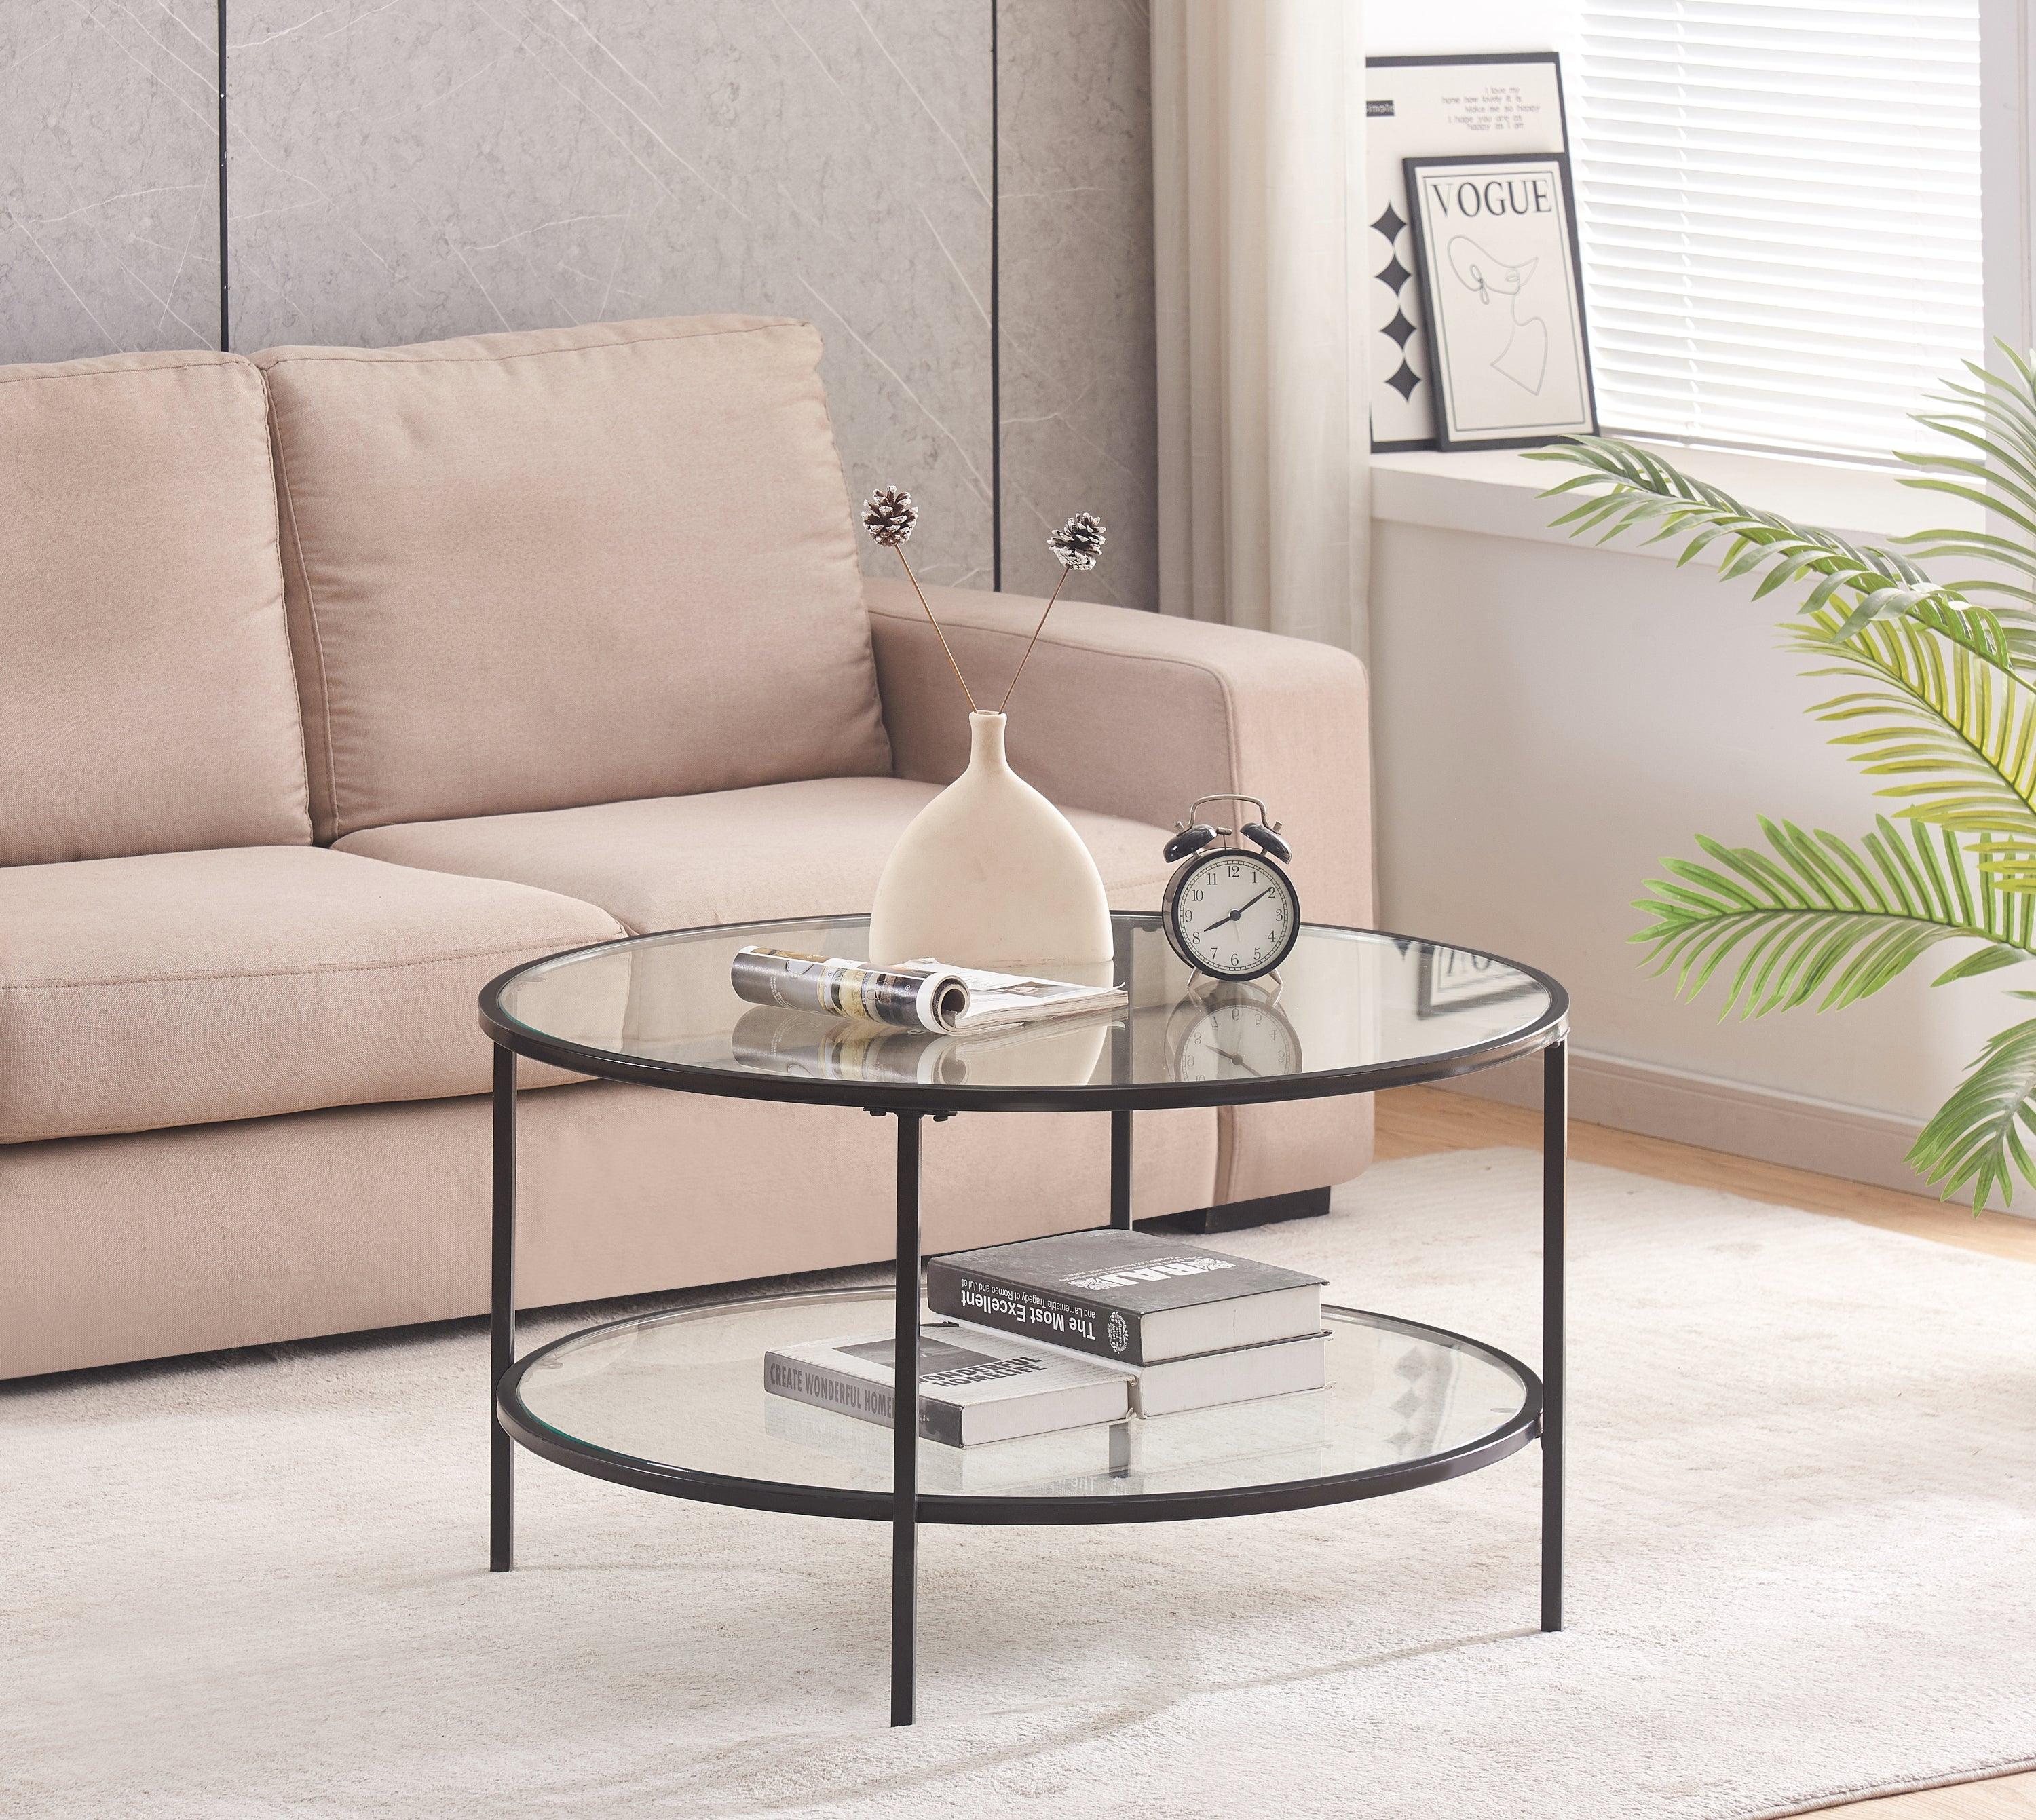 🆓🚛 2-Tier Round Glass Coffee Table, Black Frame